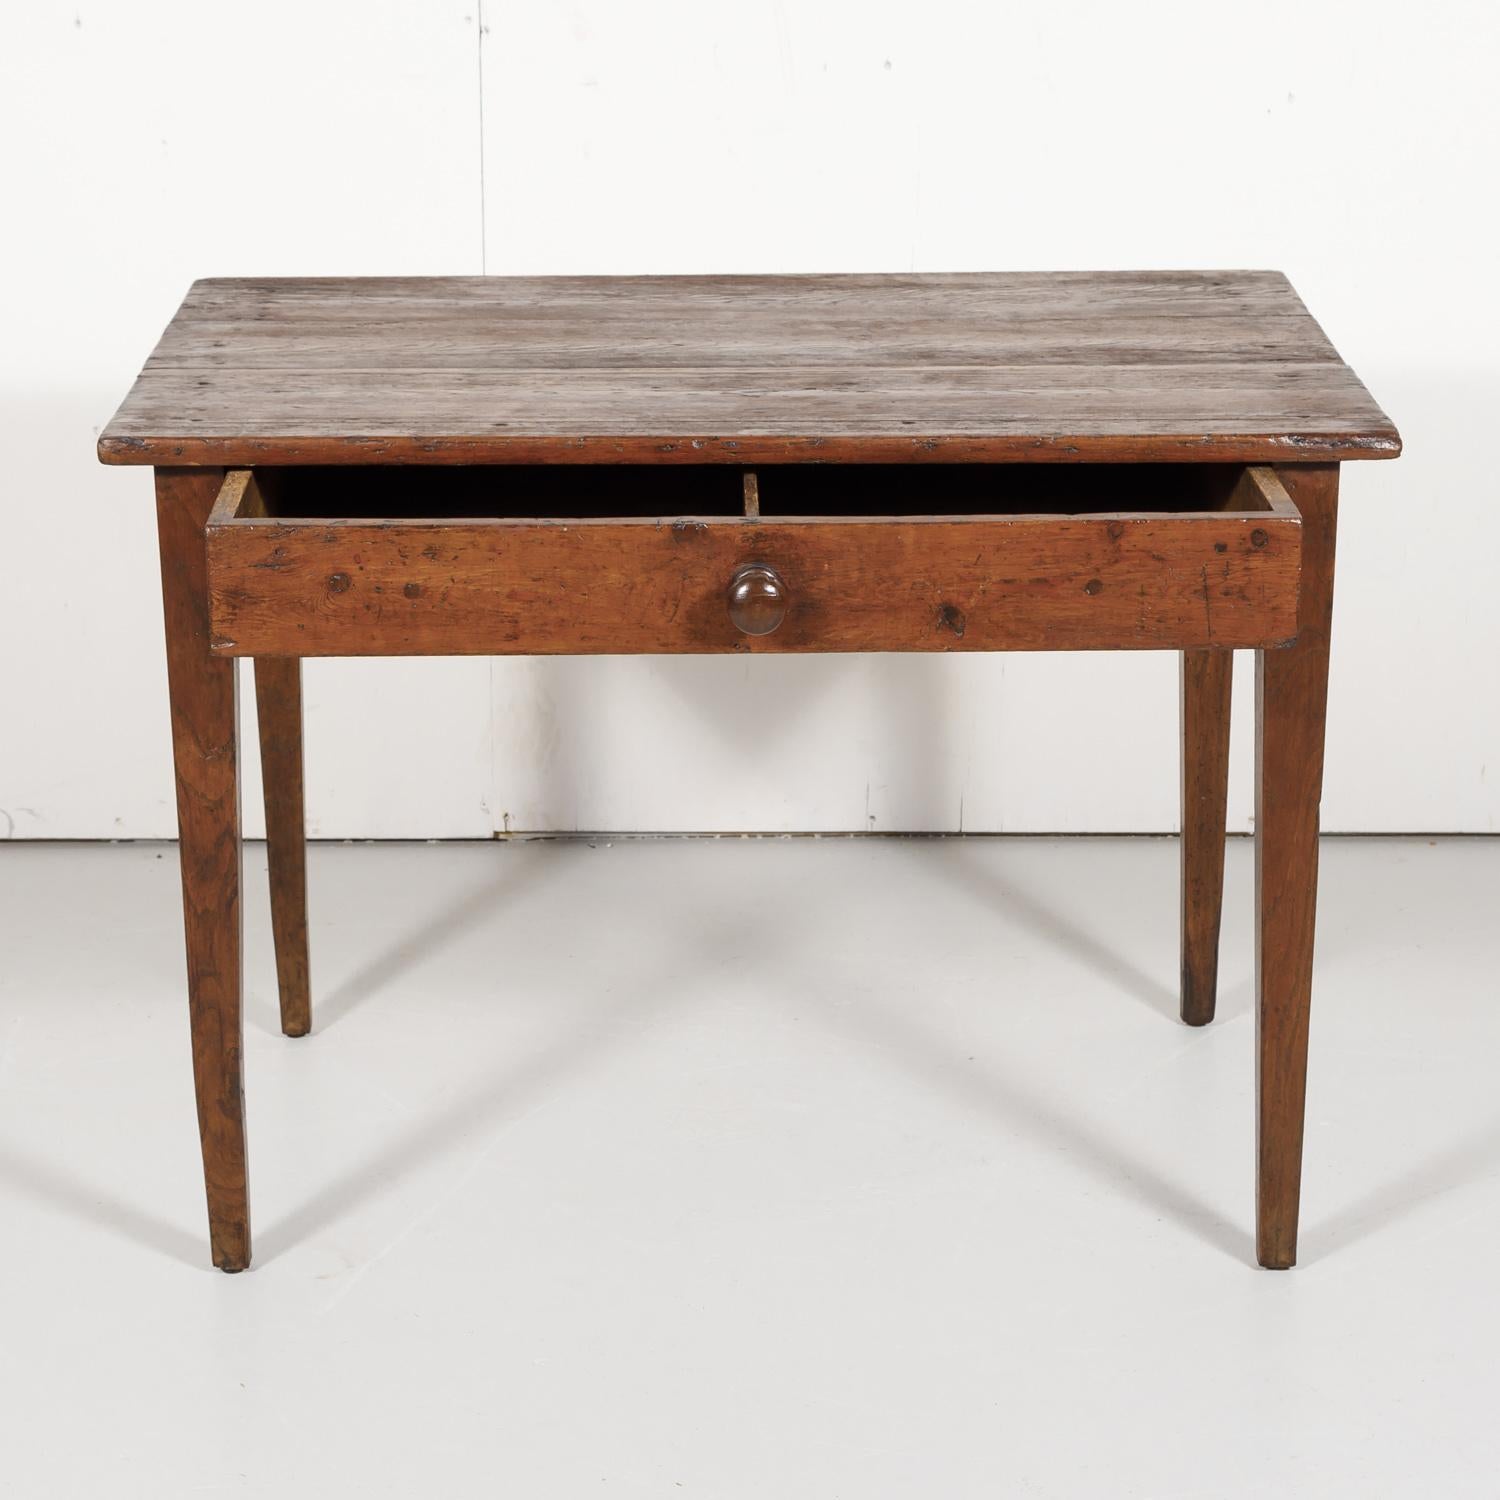 Walnut Early 19th Century Primitive French Country Side Table or Work Table